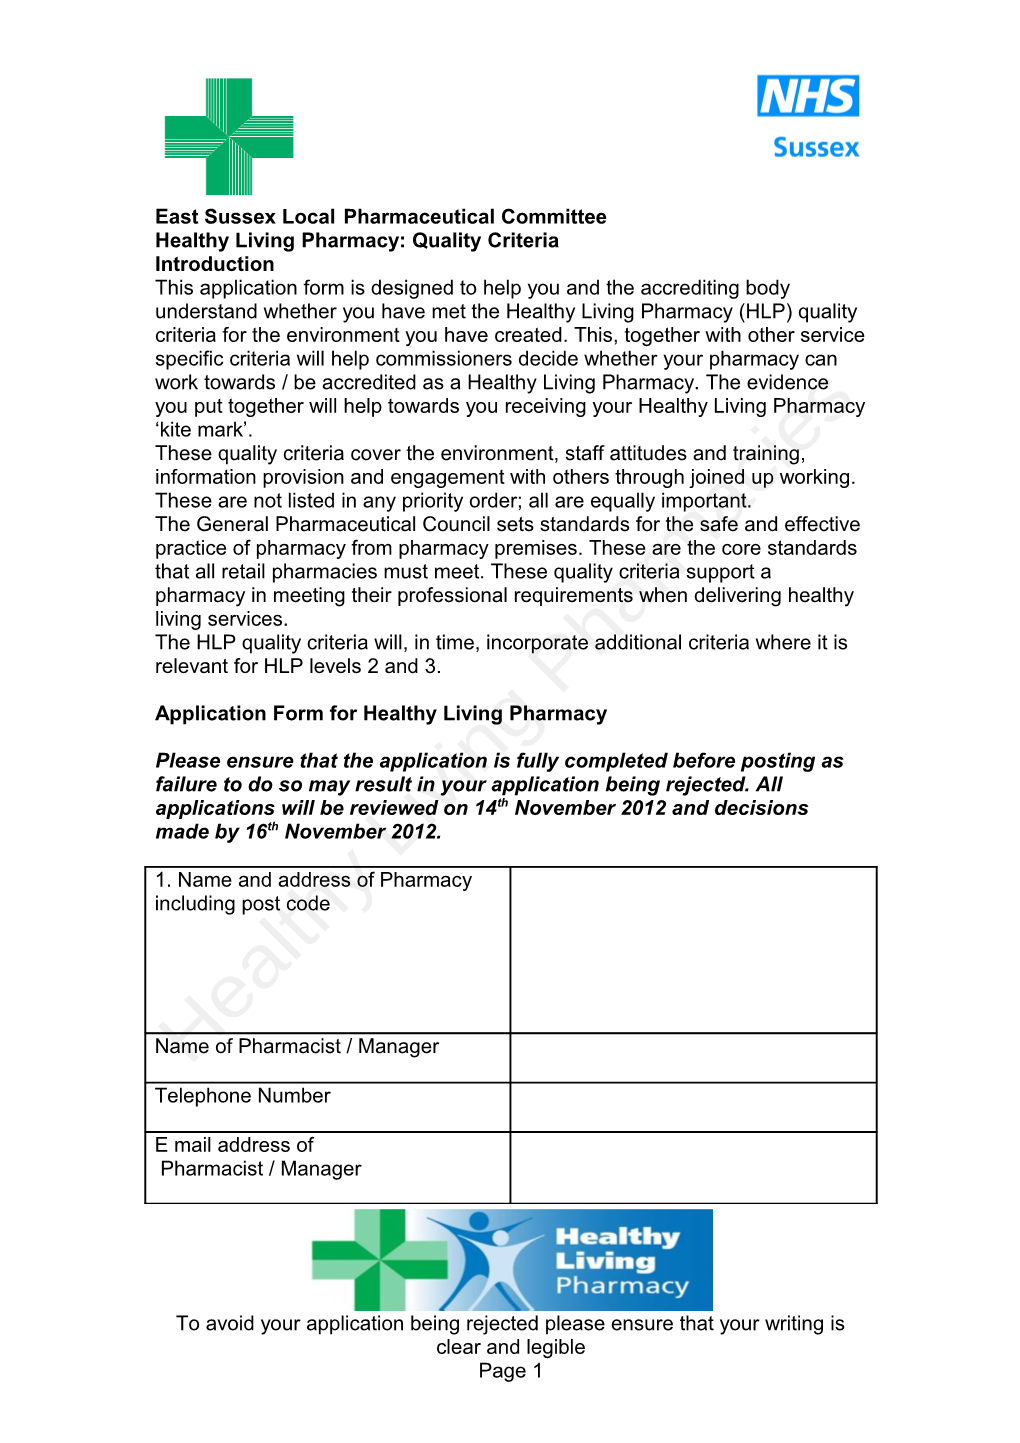 Application Form for Healthy Living Pharmacy